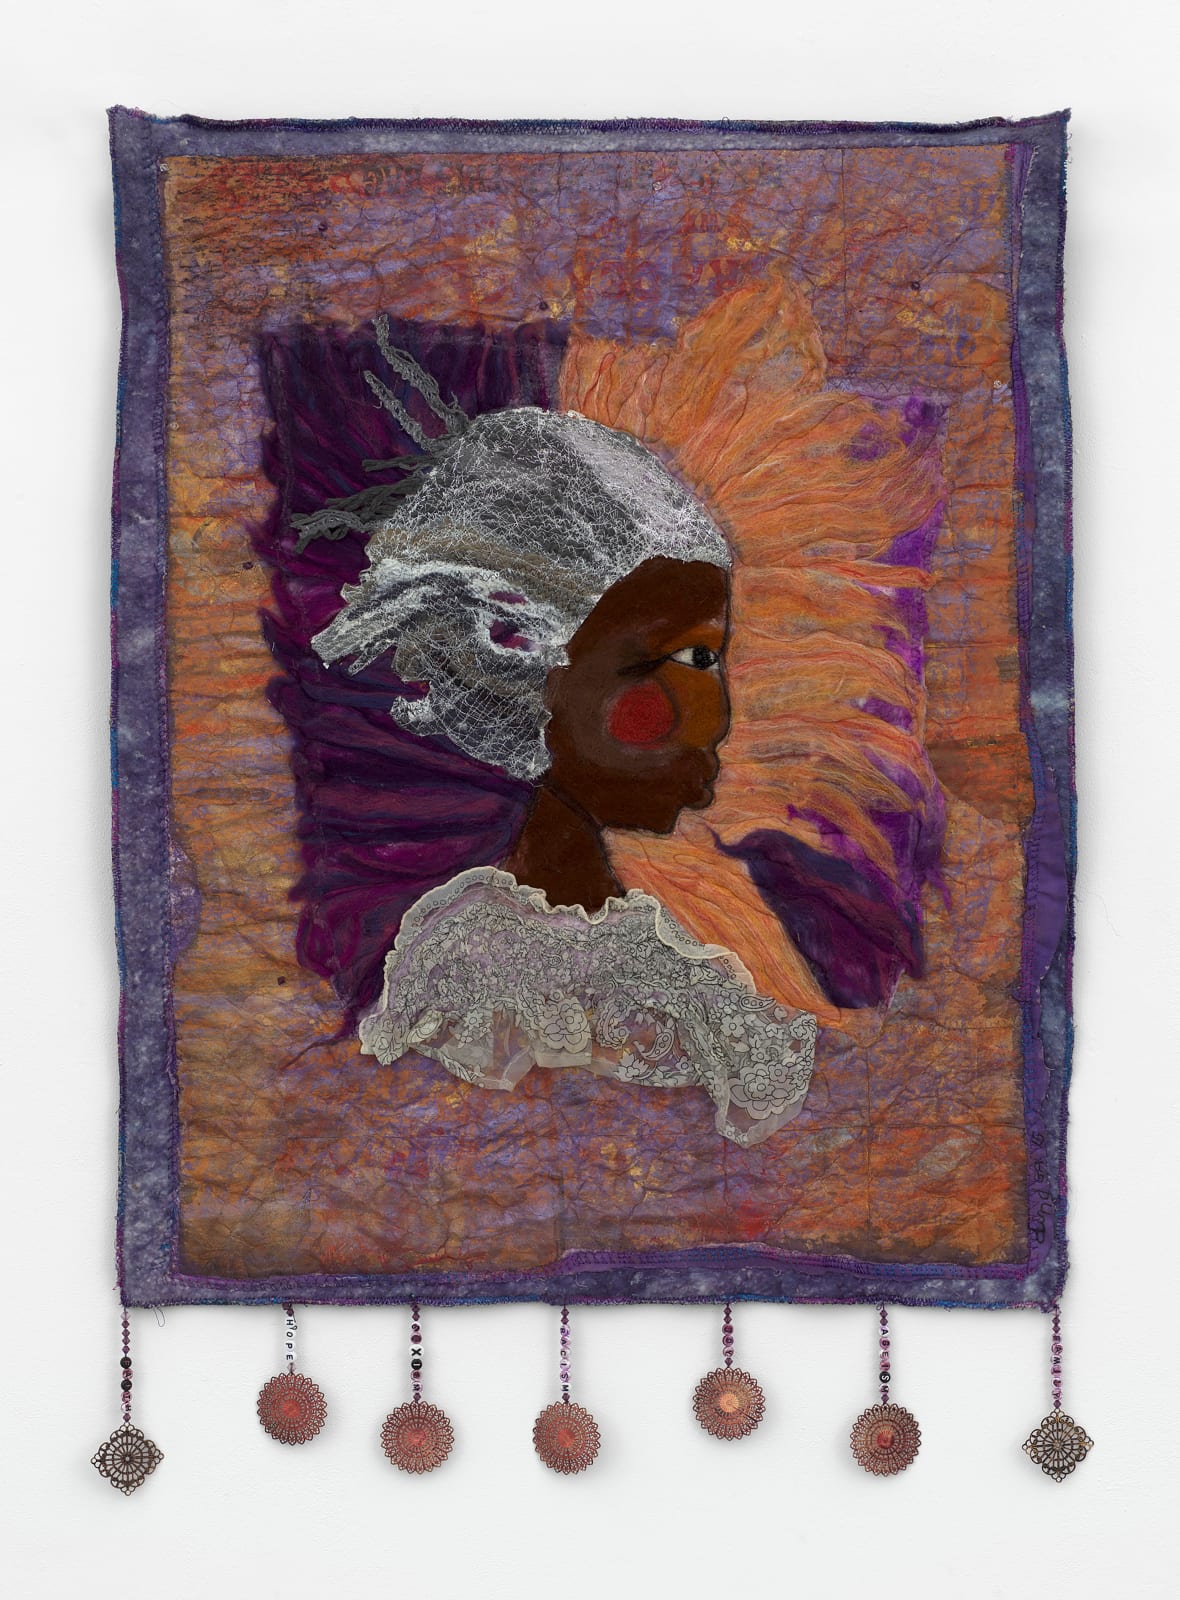 Dindga McCannon, Words Form the Threads of Our Experiences, 2015